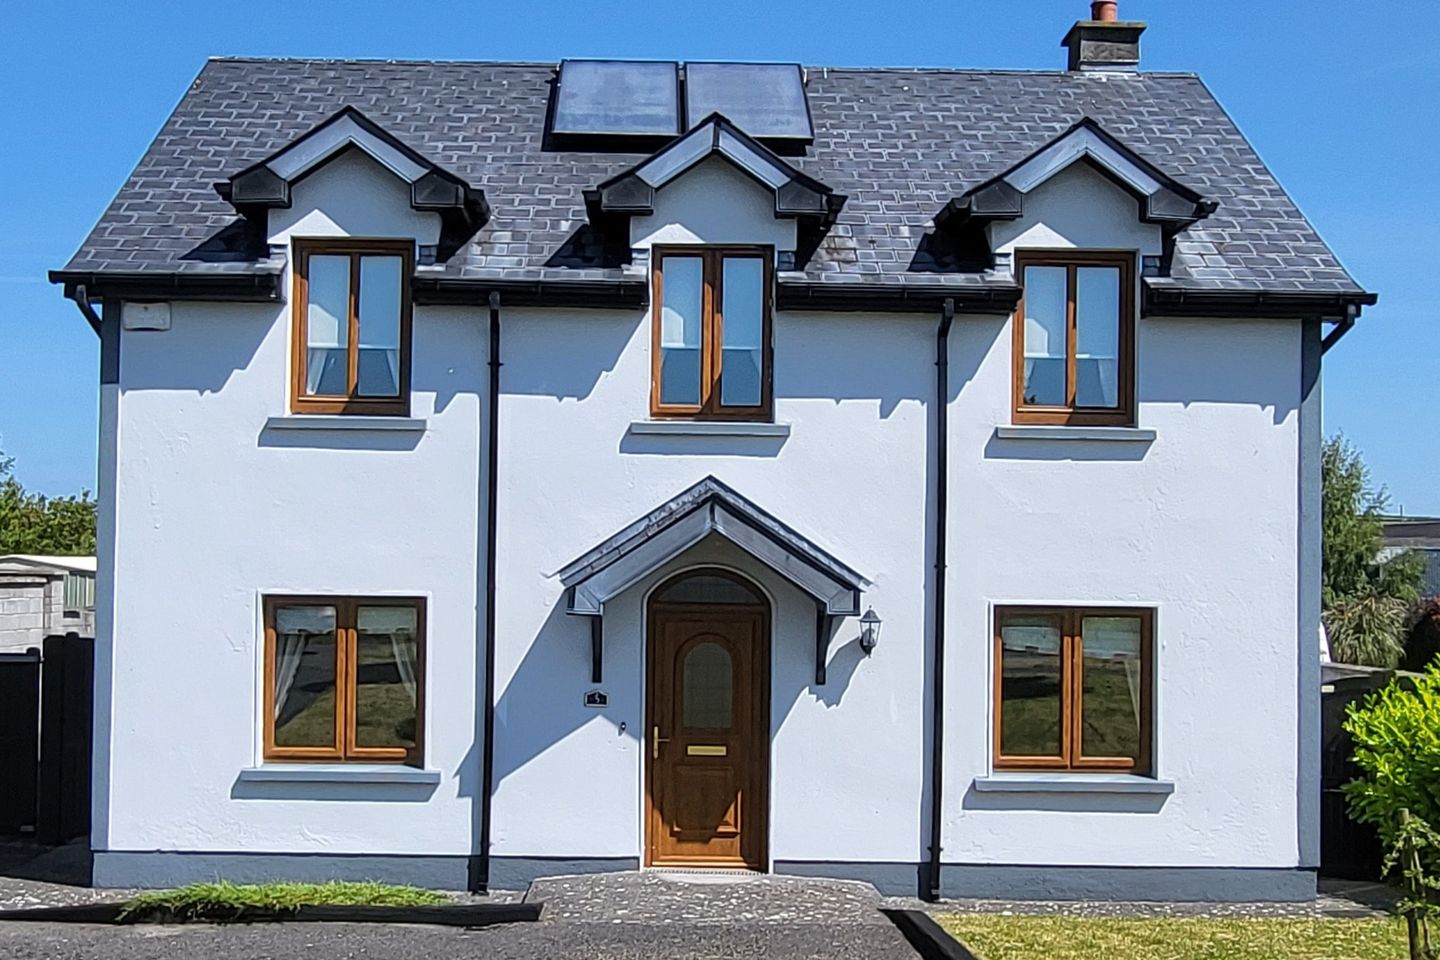 5 Mountain View, Coolderry, Birr, Co. Offaly, R42KV12